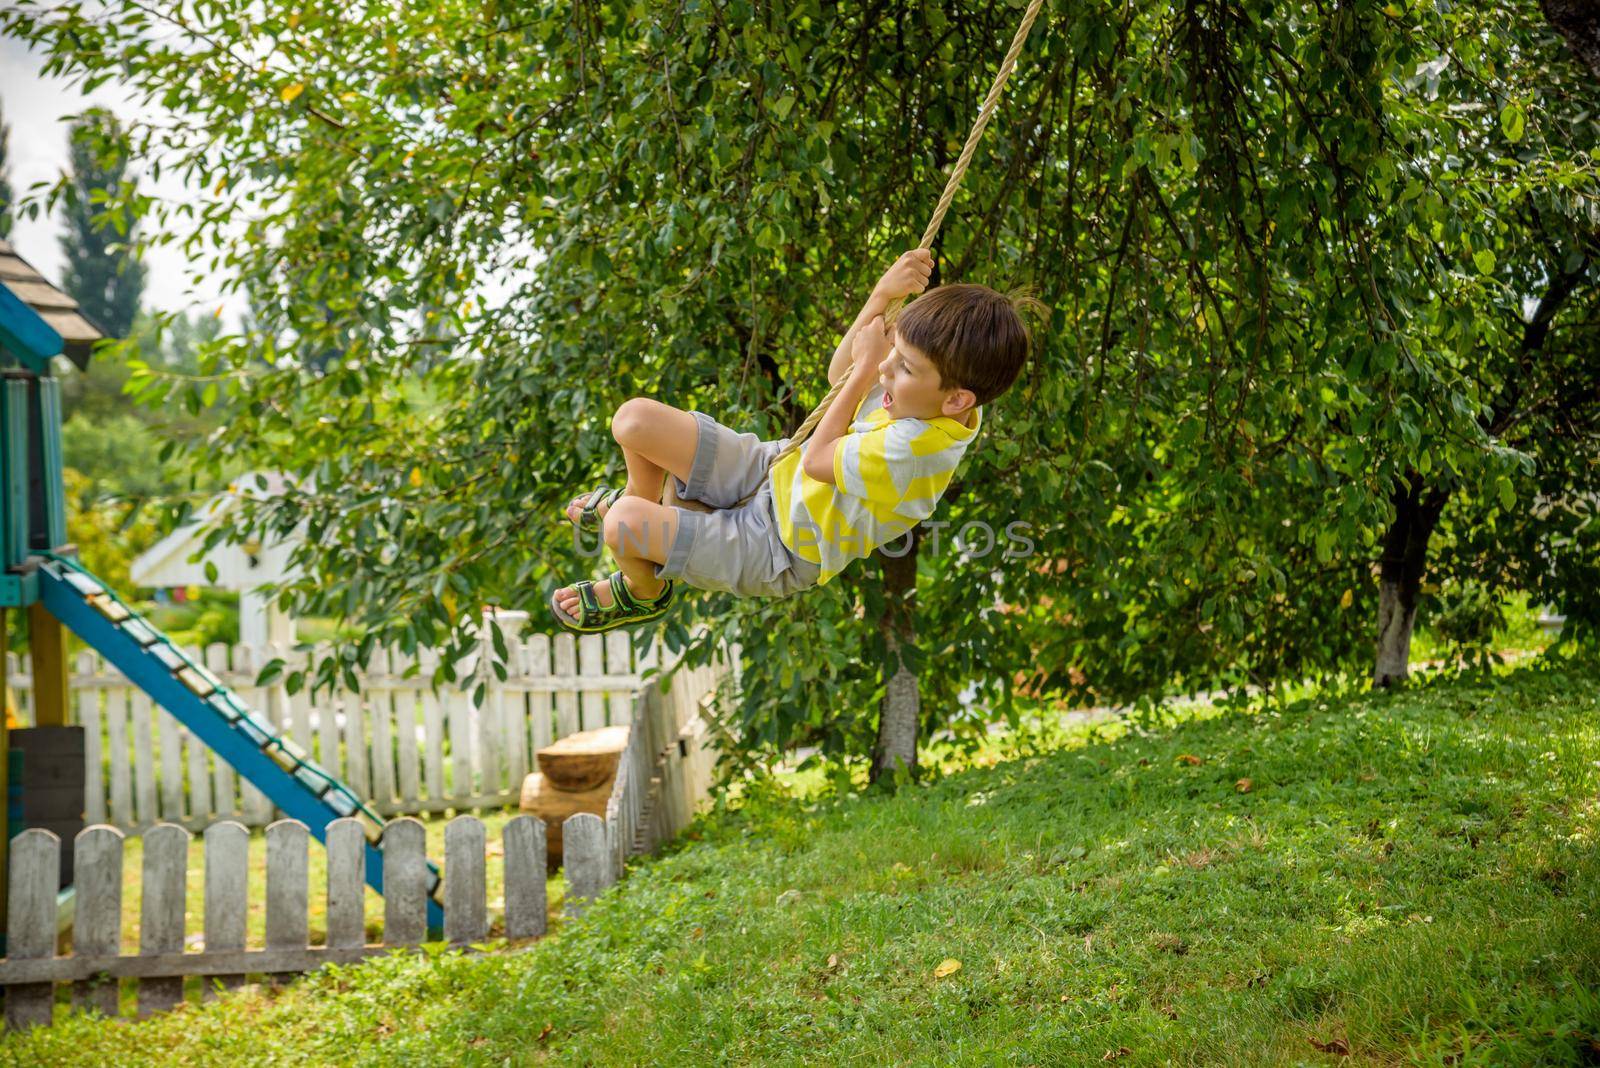 Happy little boy is having fun on a rope swing which he has found while having rest outside city. Active leisure time with children.